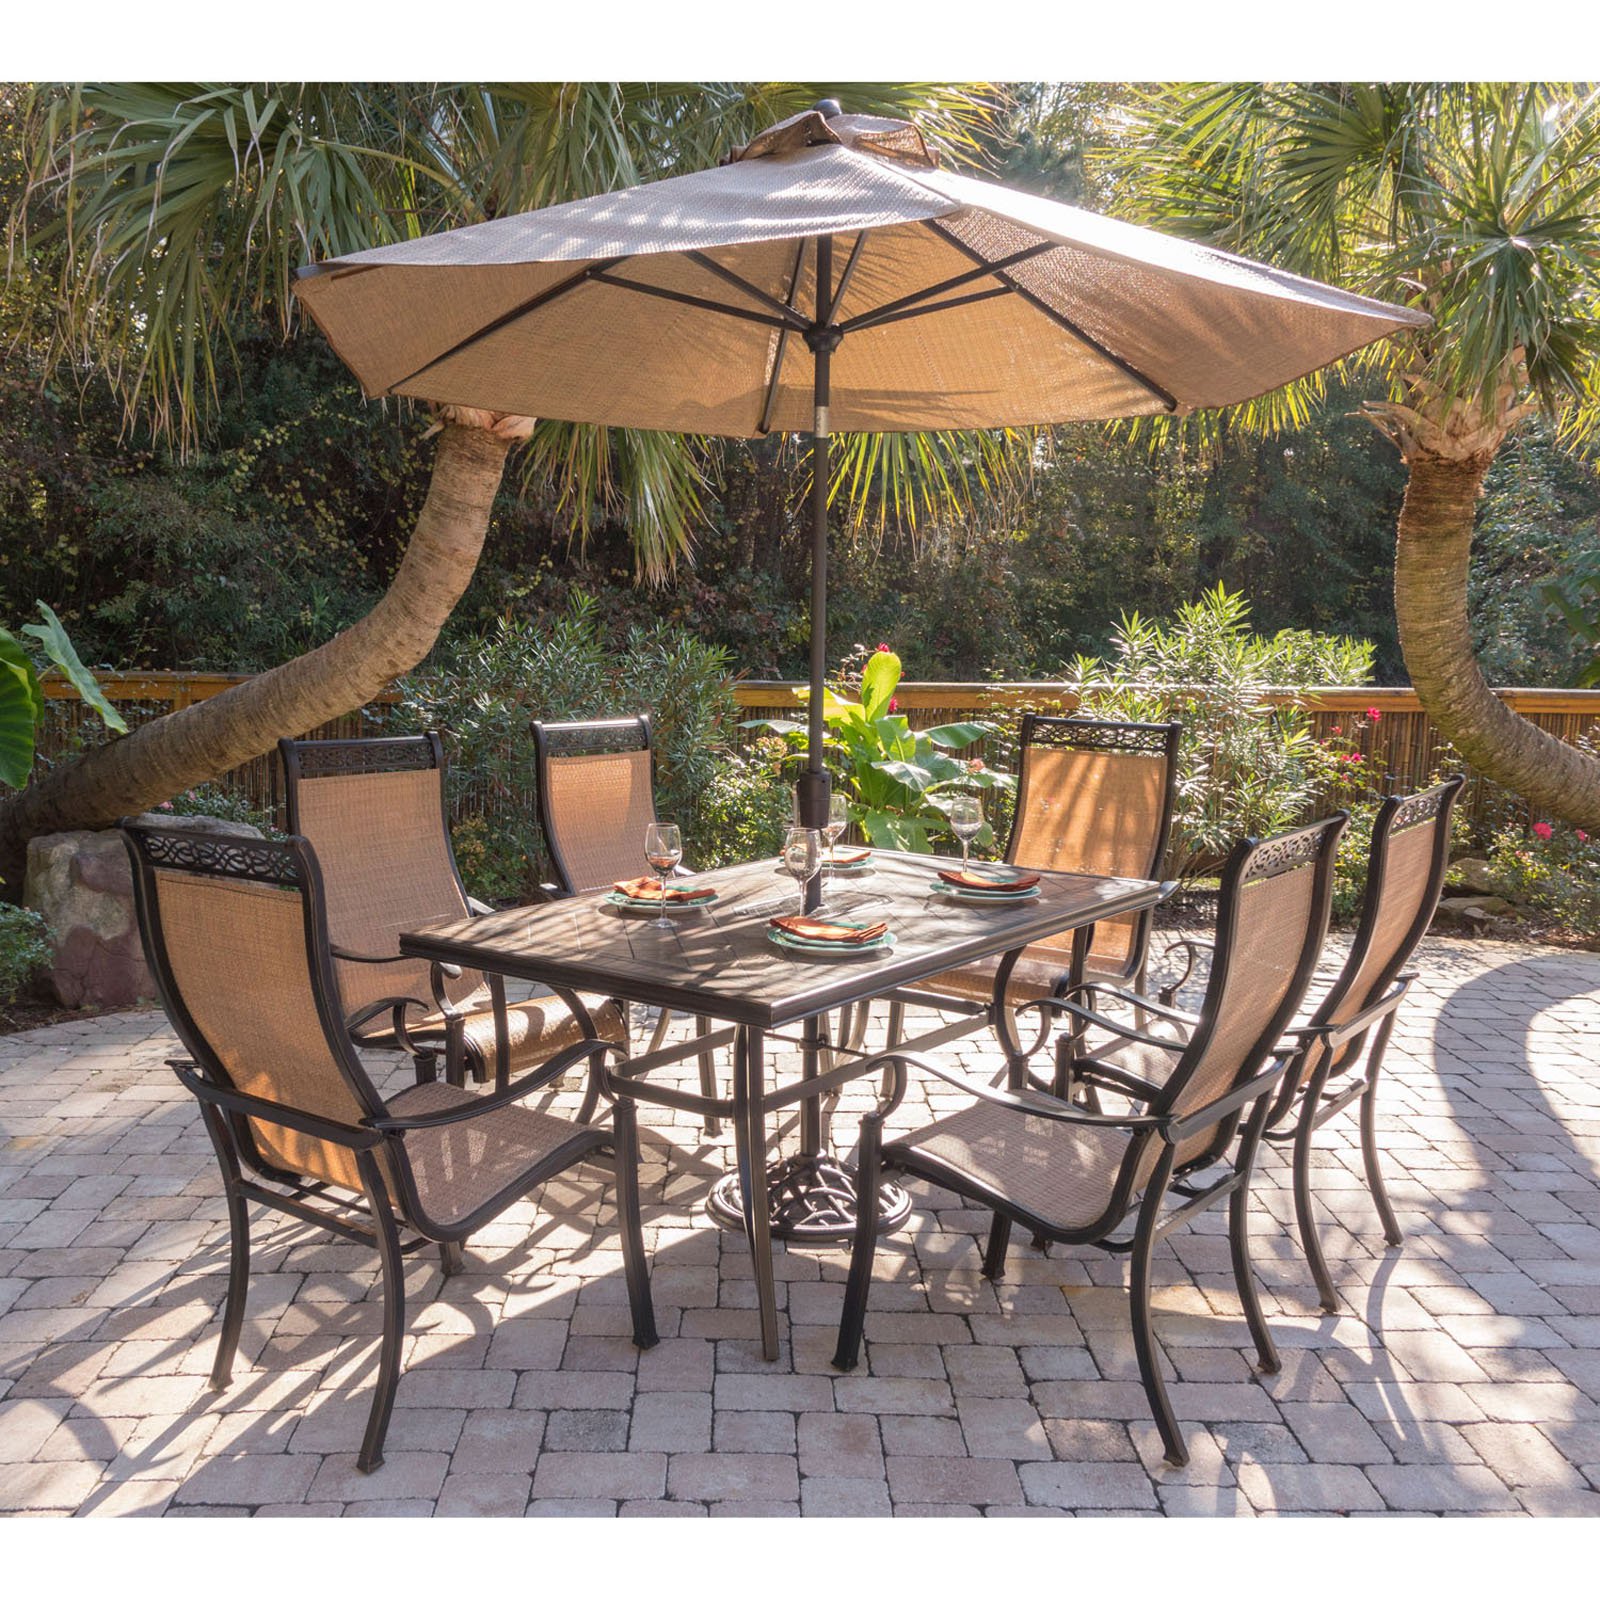 Hanover Outdoor Monaco 7-Piece Tile-Top Dining Set with Sling Chairs and Umbrella with Stand, Cedar - image 4 of 12